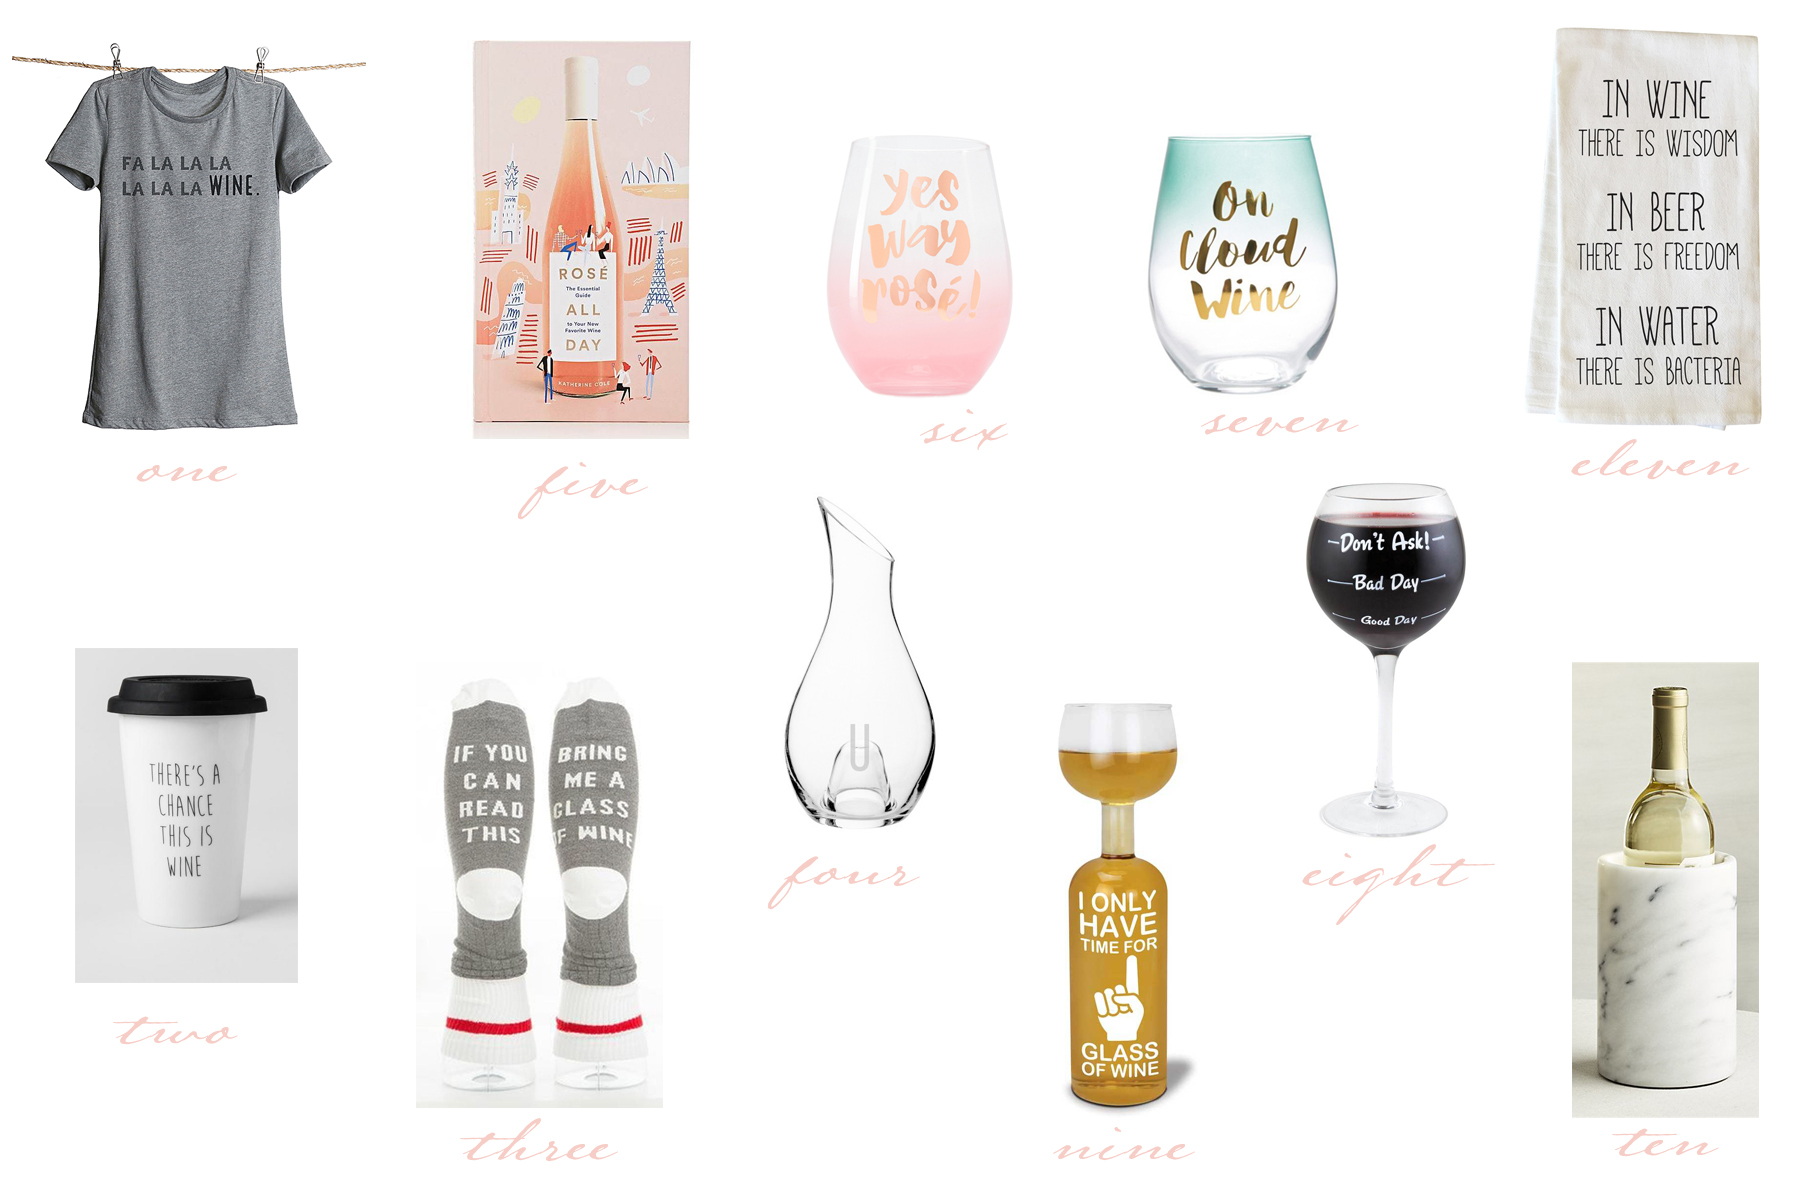 Alyssa Campanella of The A List blog shares her holiday gift guide for wine lovers